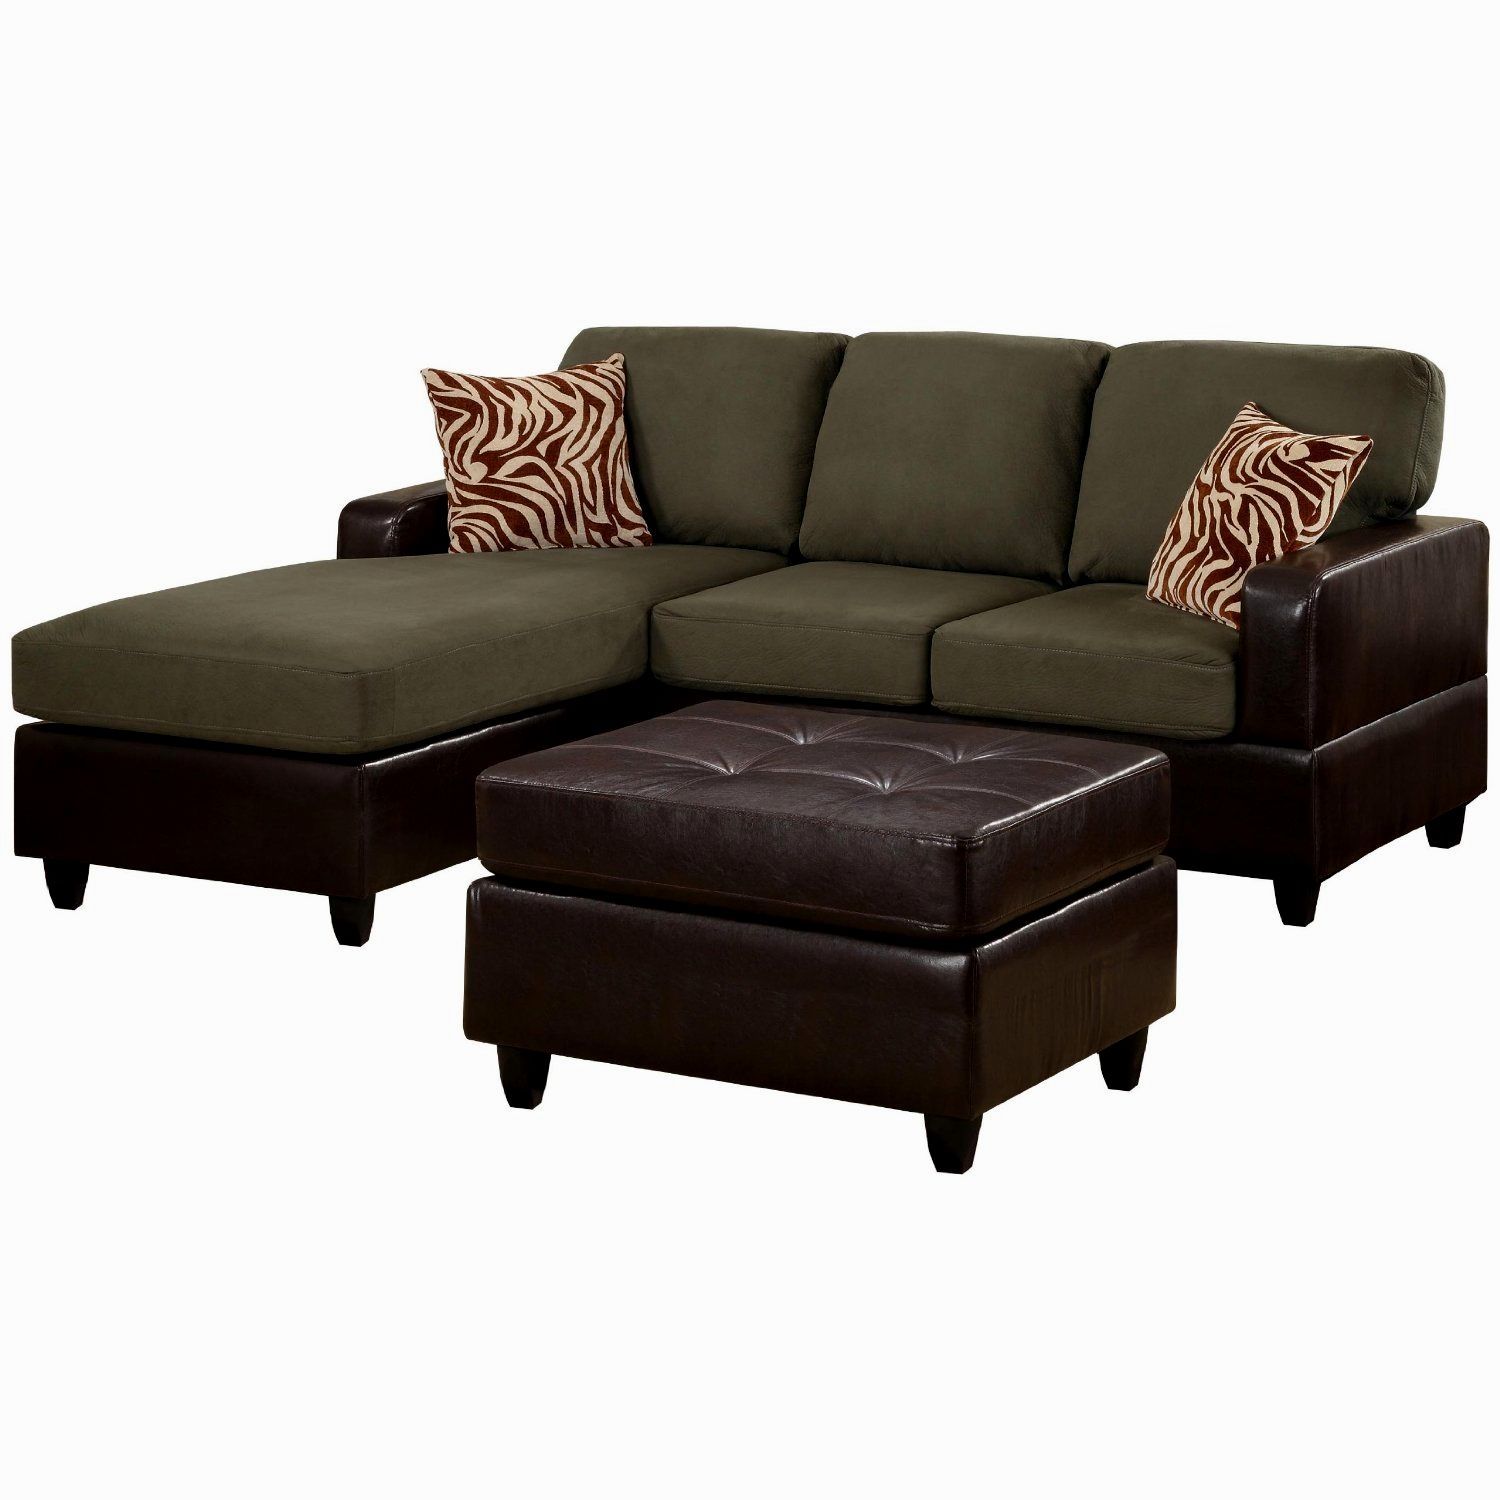 Microfiber Sectional Sofa With Ottoman – Ideas On Foter With Regard To Microfiber Sectional Corner Sofas (View 17 of 20)